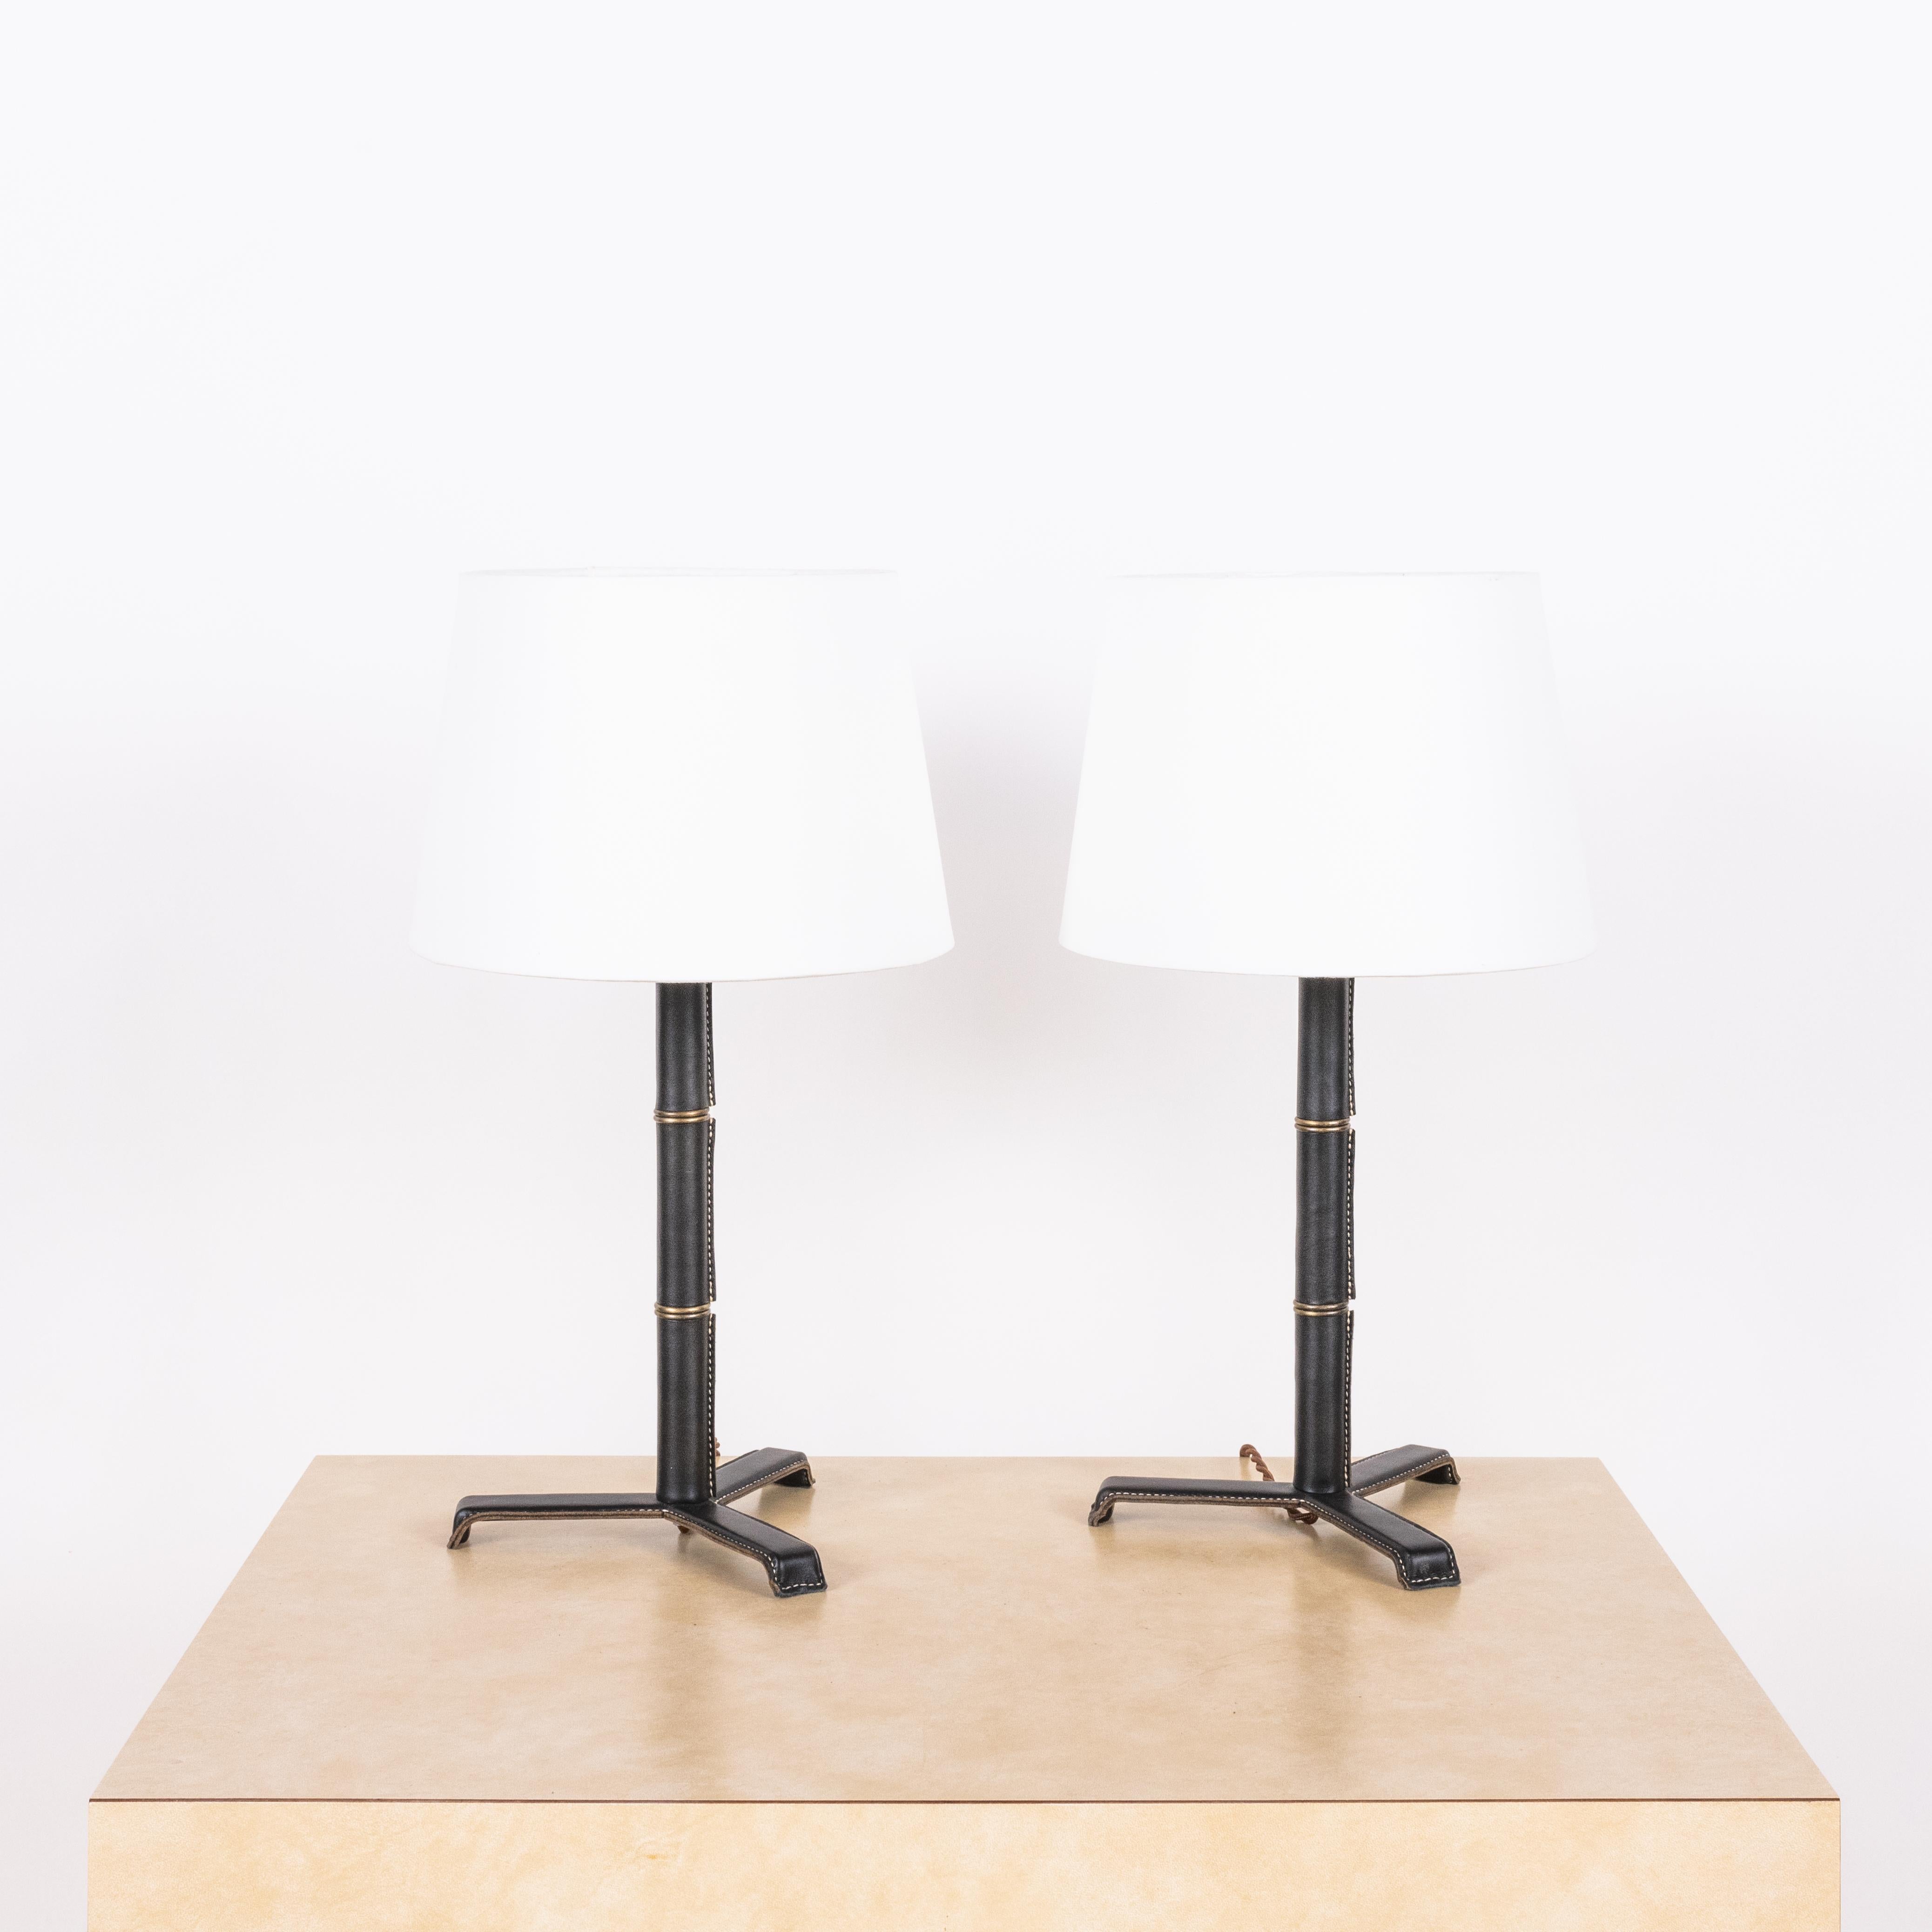 Introducing the 'Sellier' French modernist-style stitched black leather table lamps by Design Frères.

Crafted from premium black leather, the stitched detailing adds a touch of sophistication, while the parchment paper shade emits a warm and